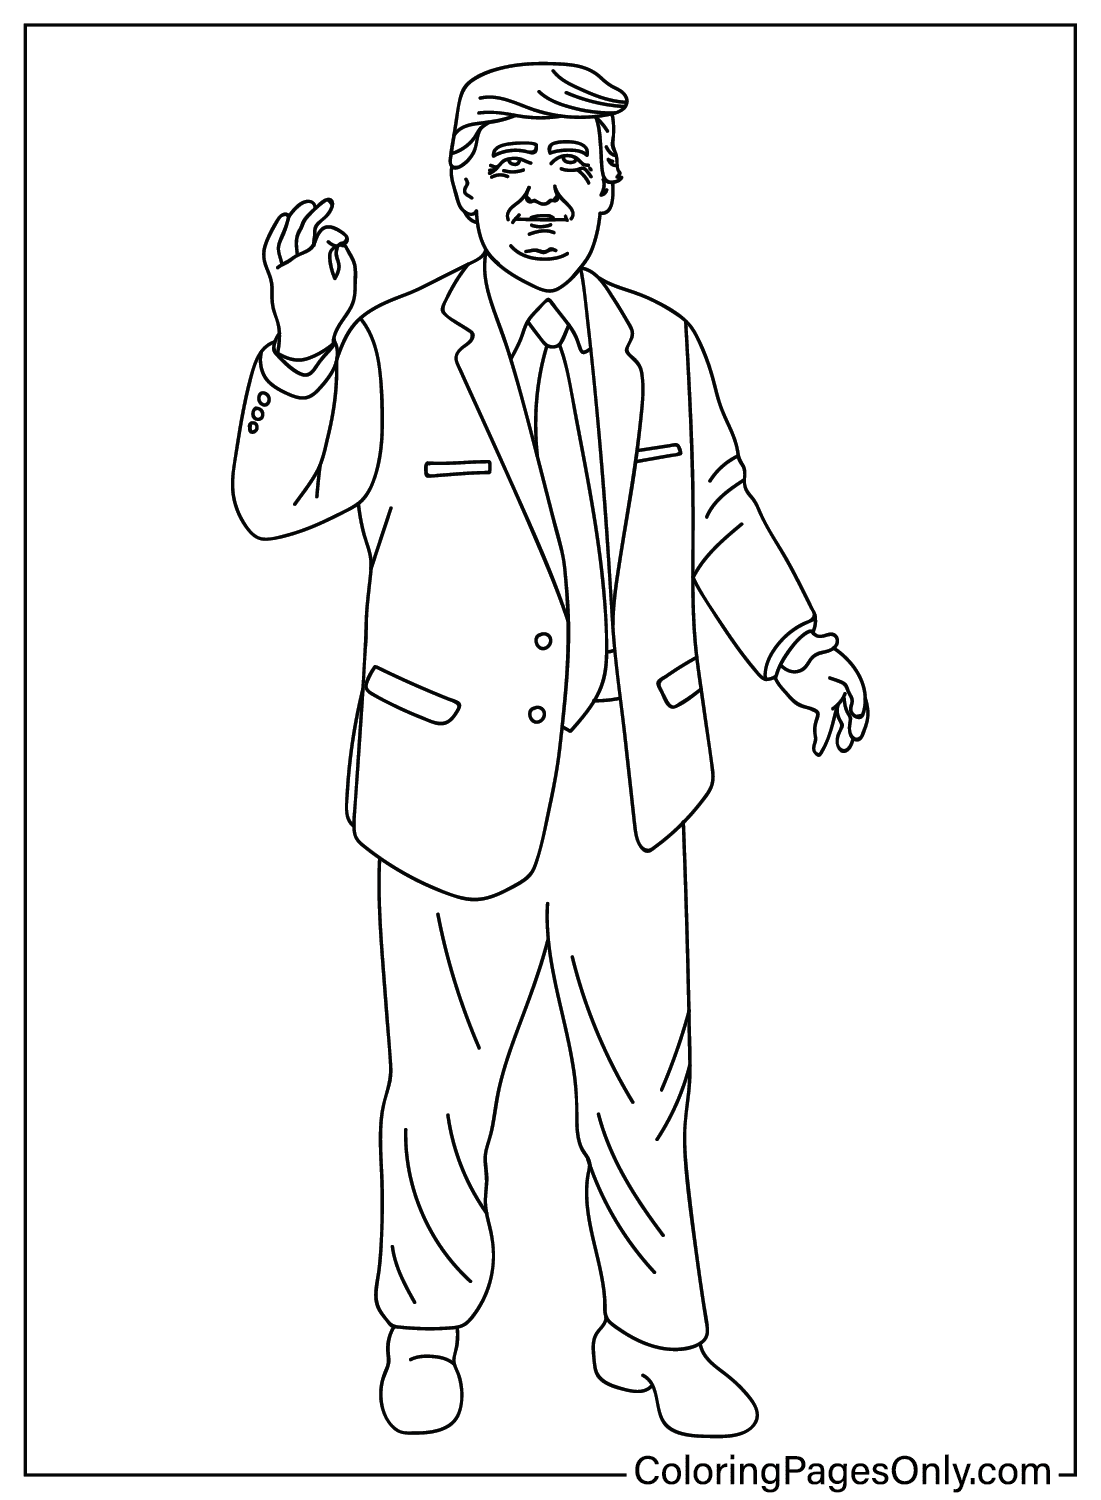 Donald Trump Coloring Pages to Download from Donald Trump